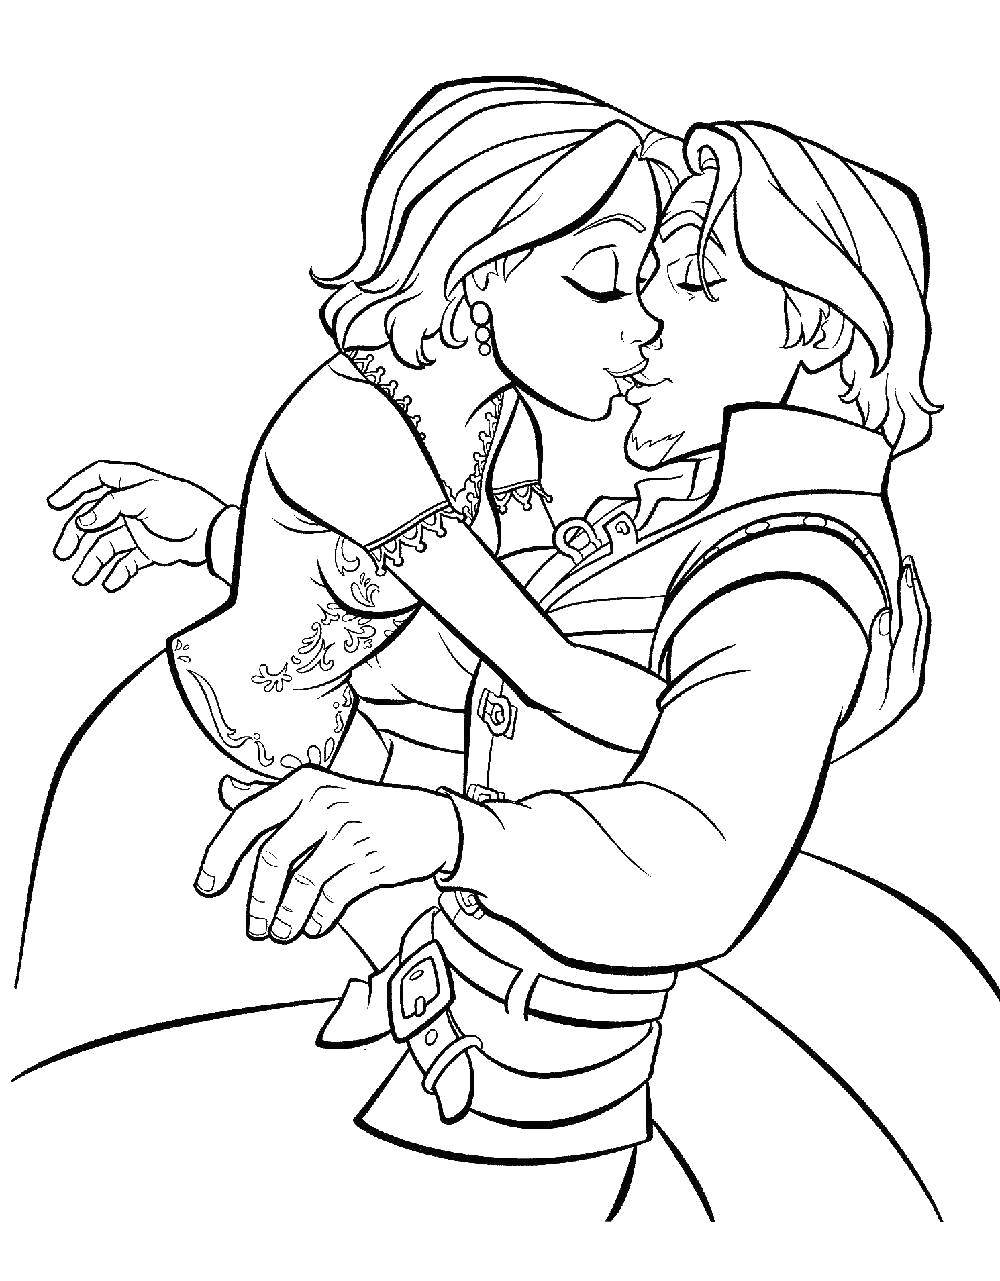 Coloring Rapunzel and her Prince. Category kissing. Tags:  Disney, Rapunzel.